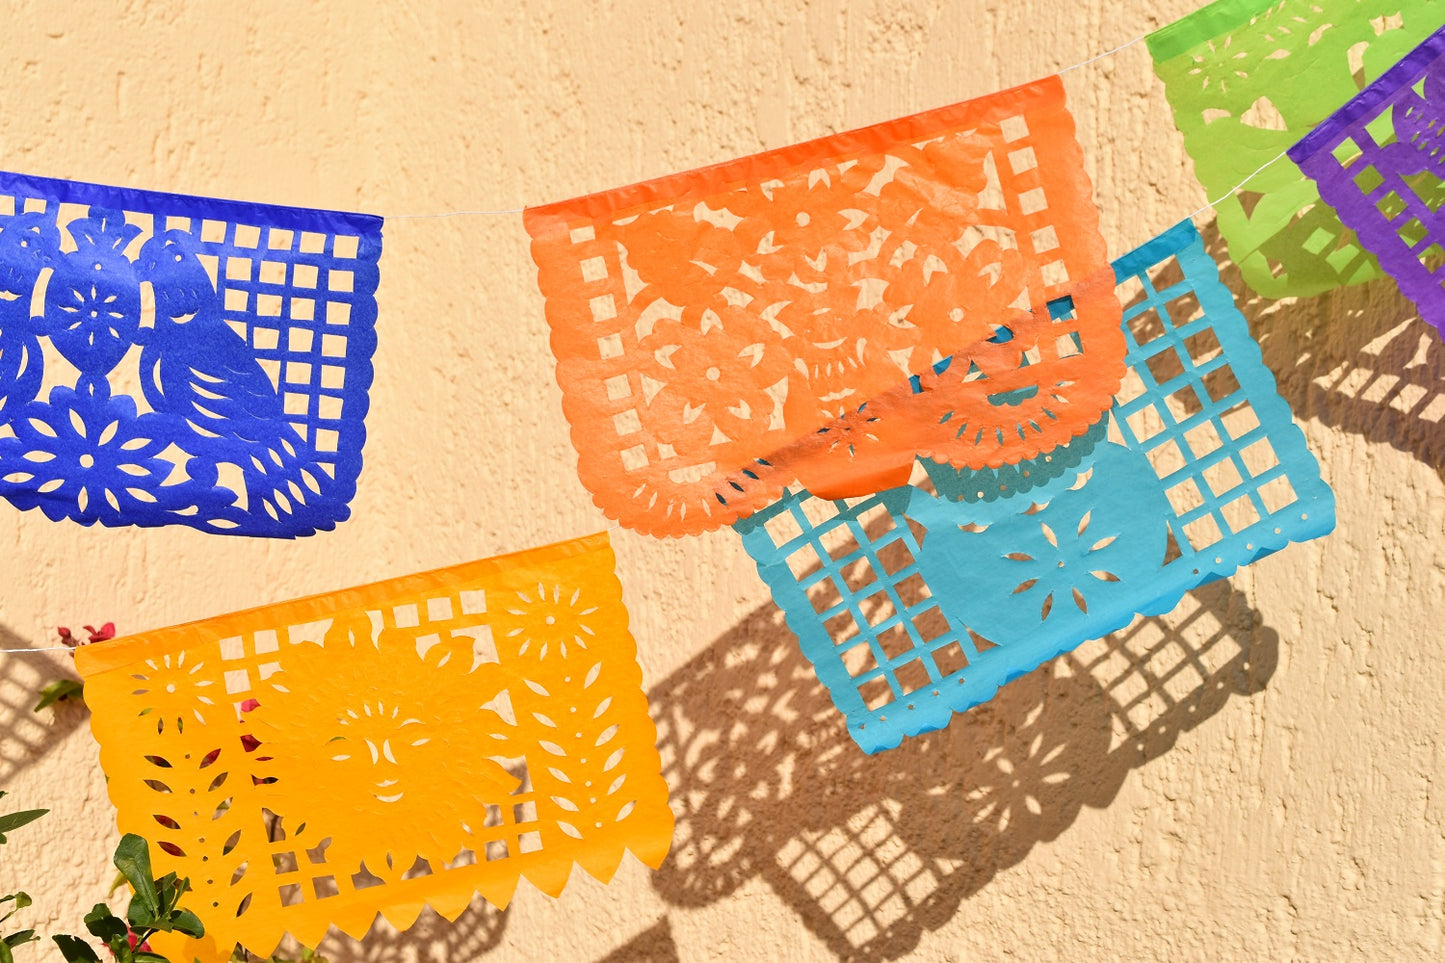 Mexican Bunting | 1 x 4.5 metre / 15 foot Colourful Mexican Paper Banner with 10 Medium Flags - ARTMEXICO